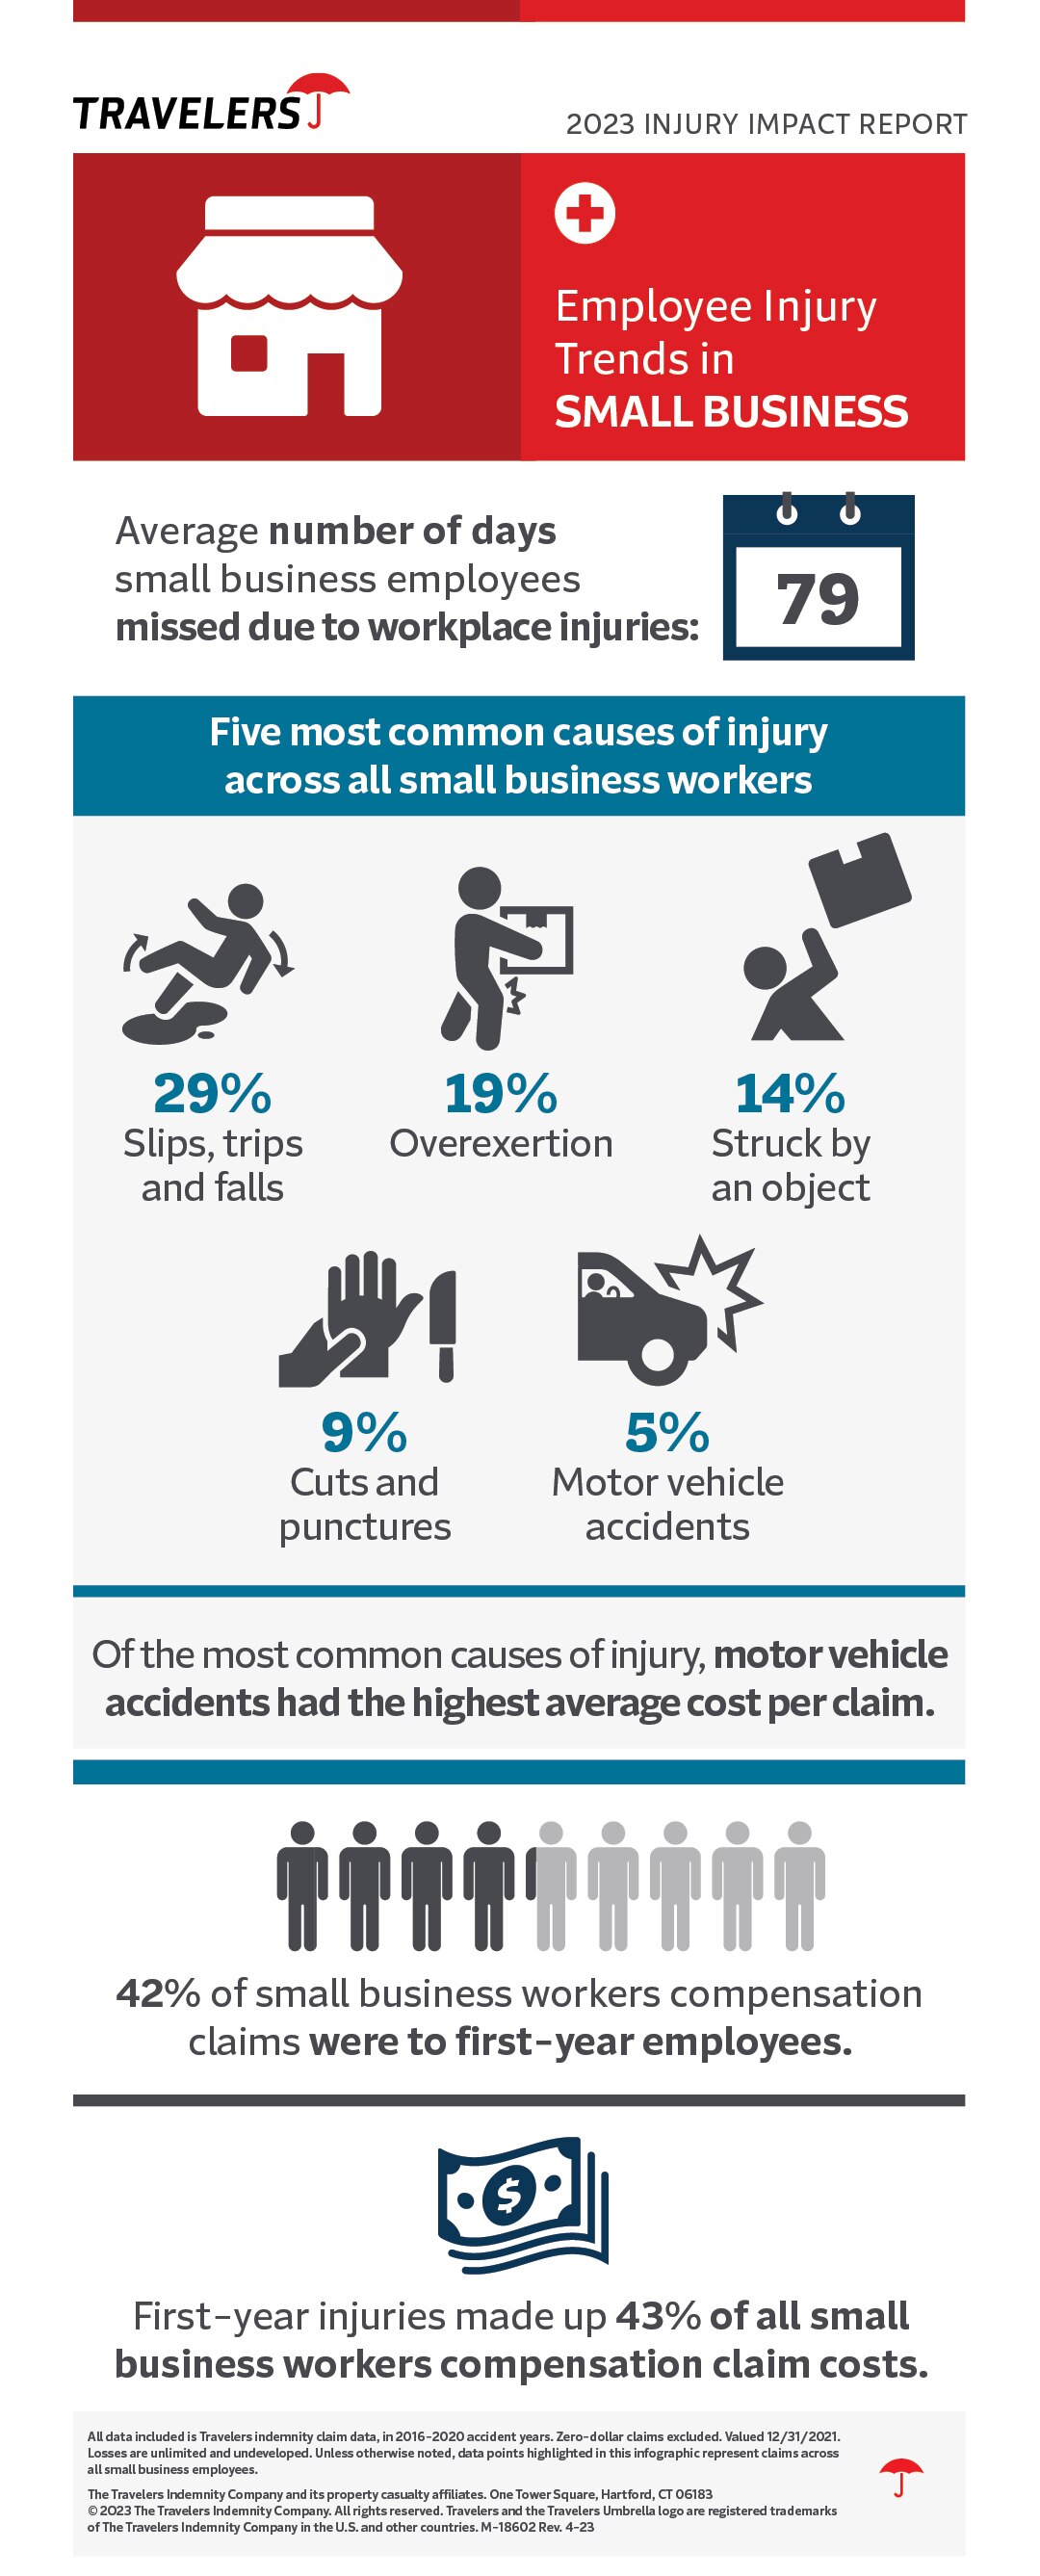 2023 Employee Injury Trends in Small Business infographic, see details below